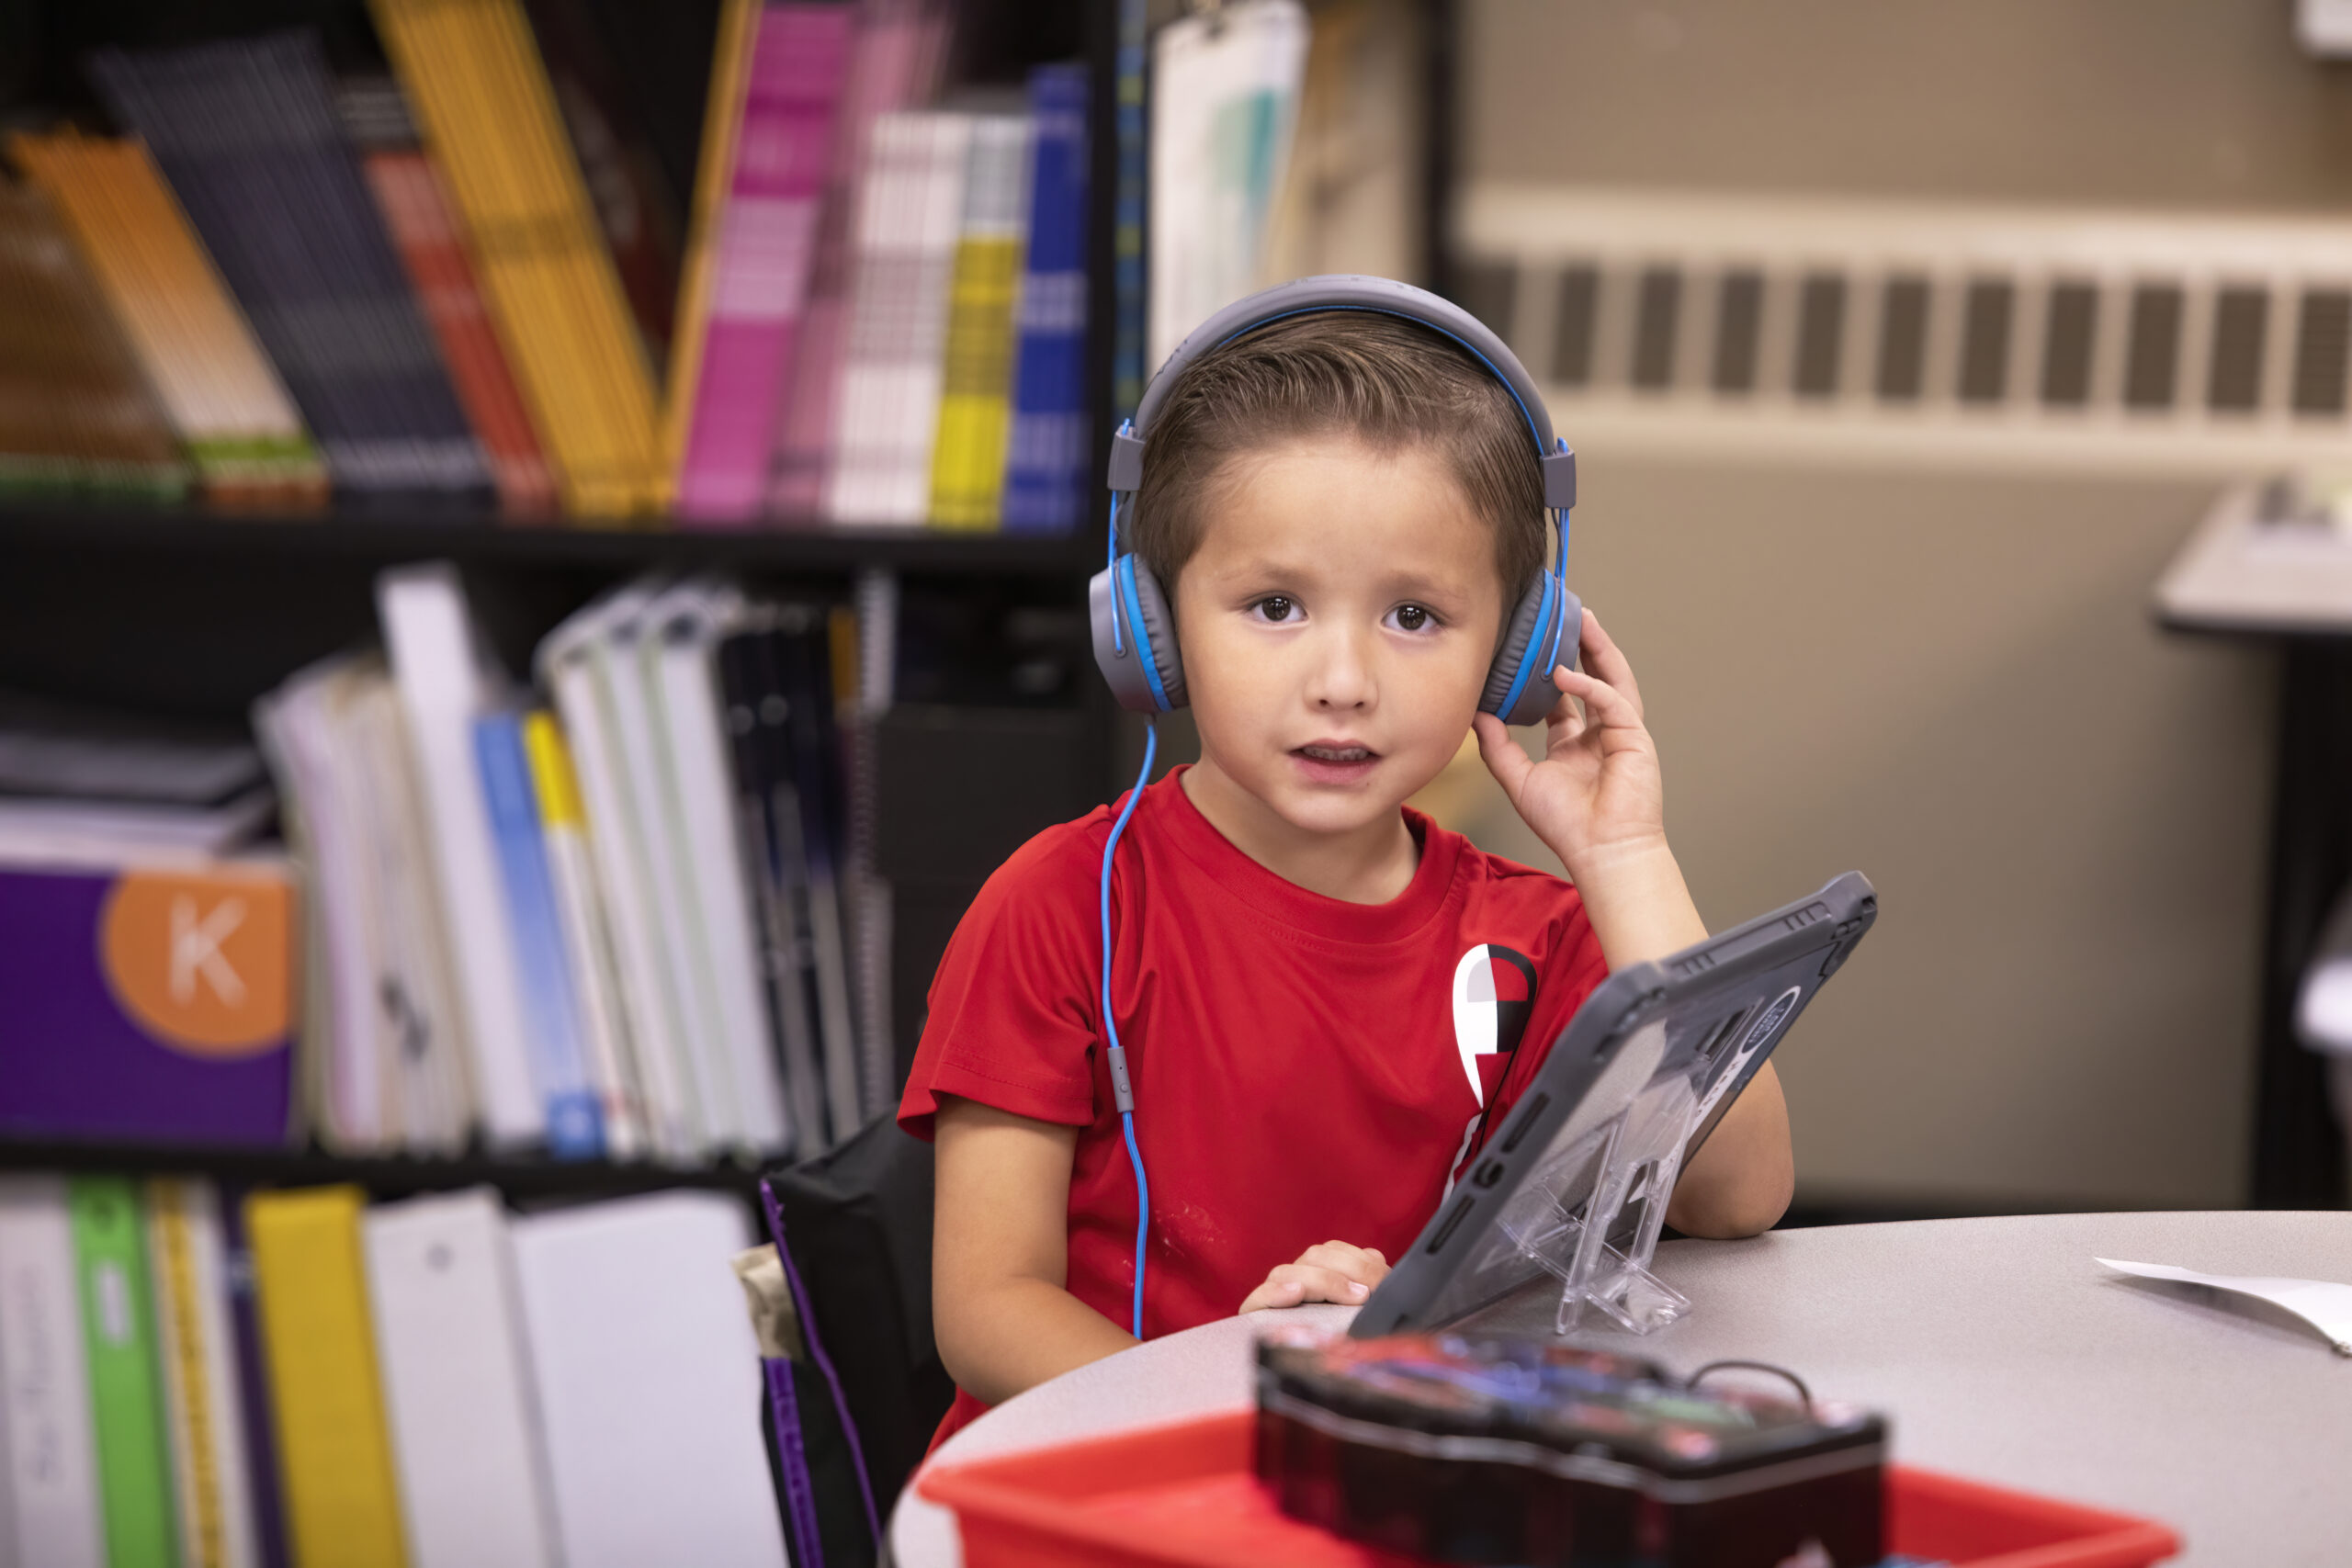 Photograph of a brown haired young boy wearing a red shirt and headphones working on an iPad.